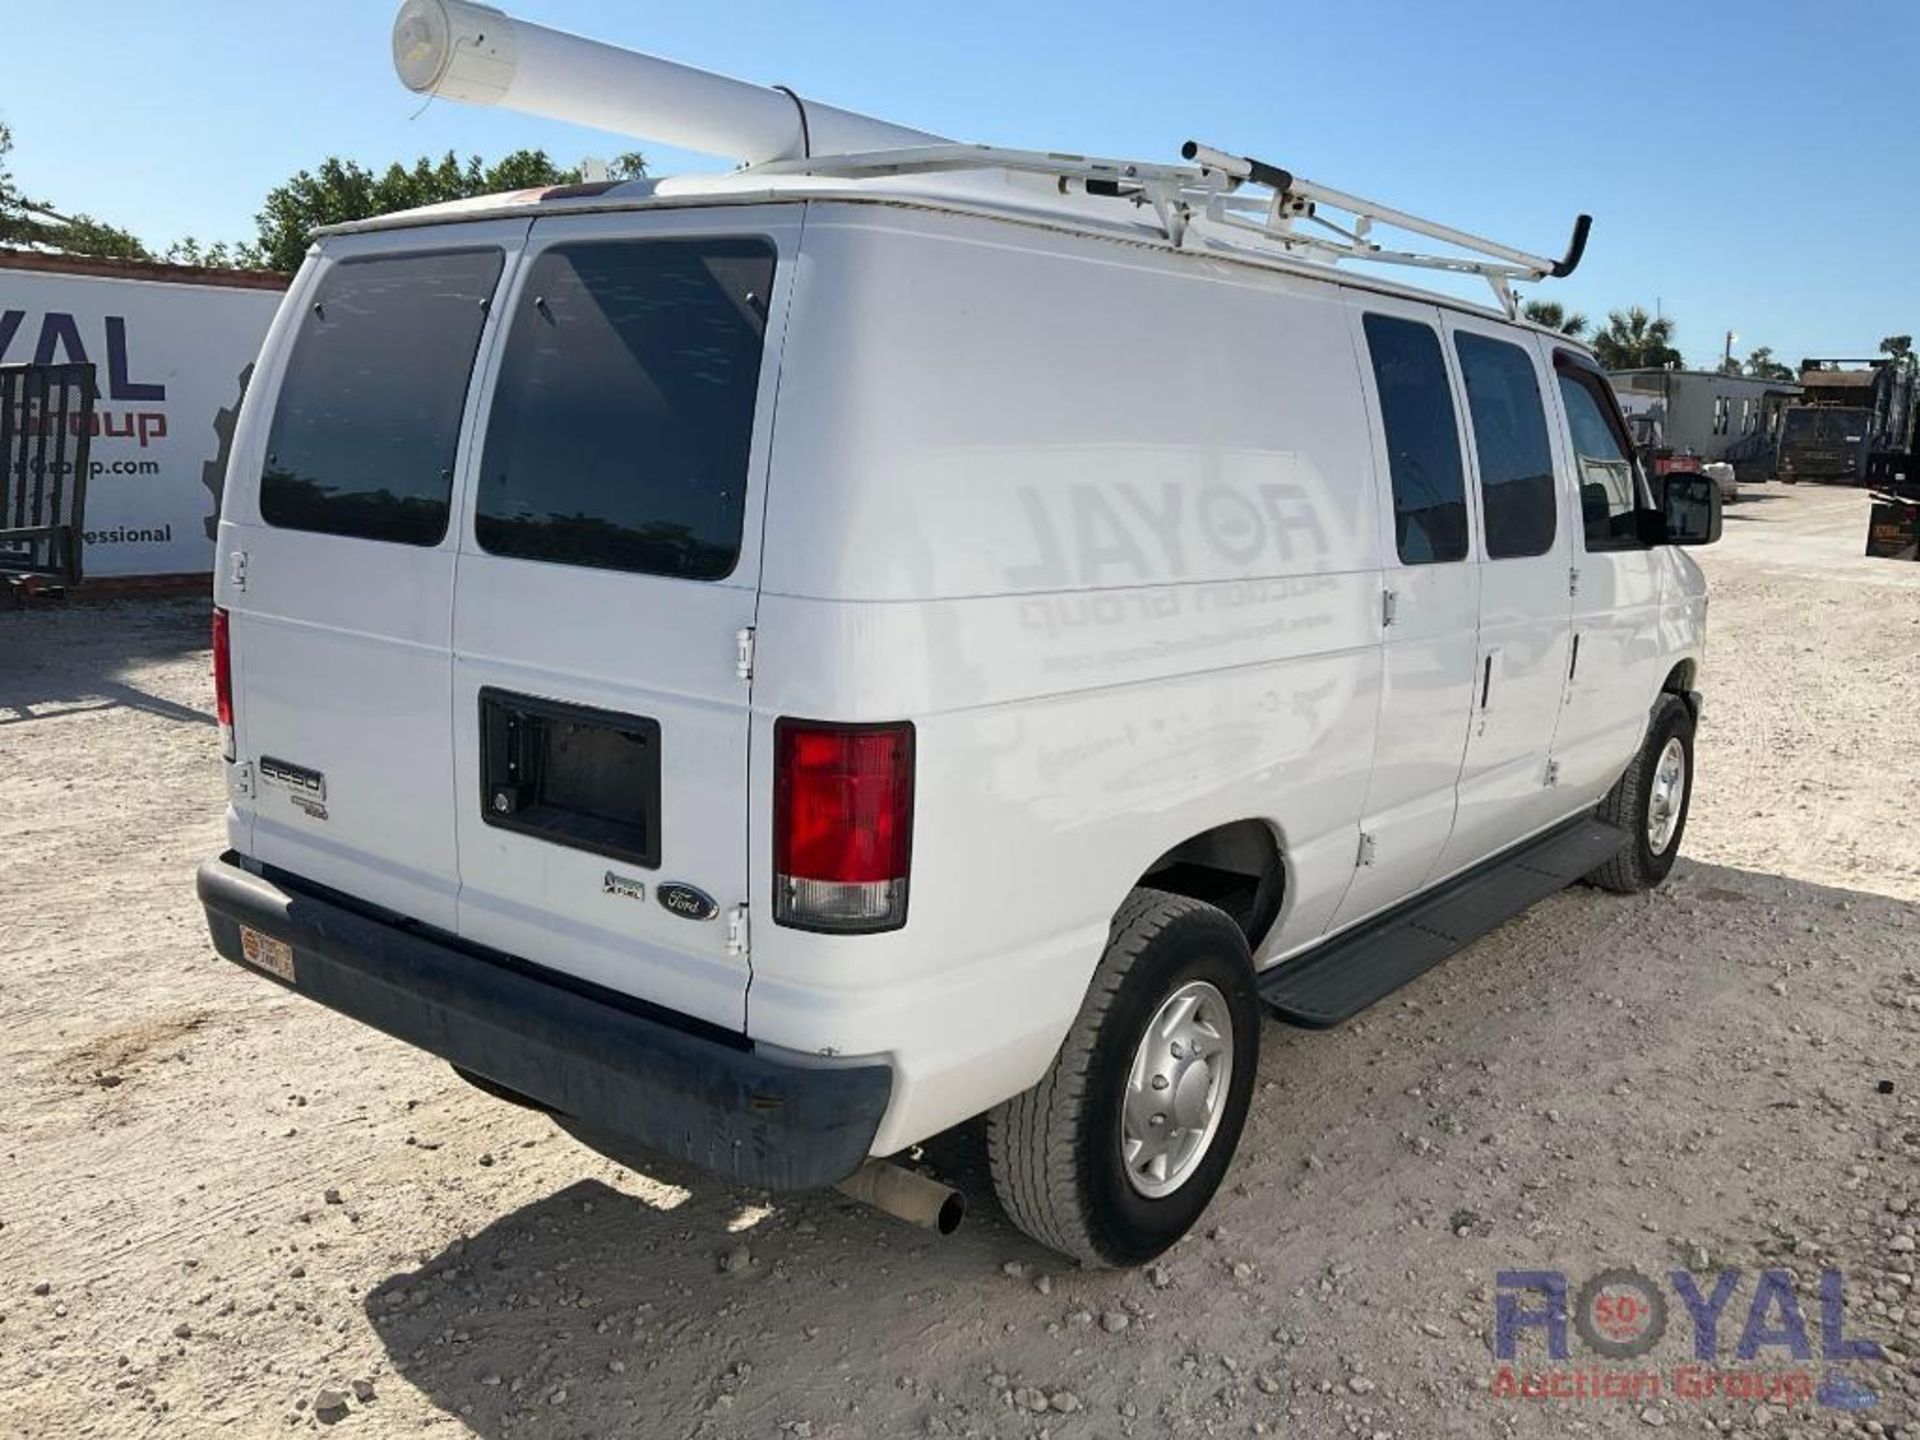 2013 Ford E250 Cargo Van - Image 3 of 33